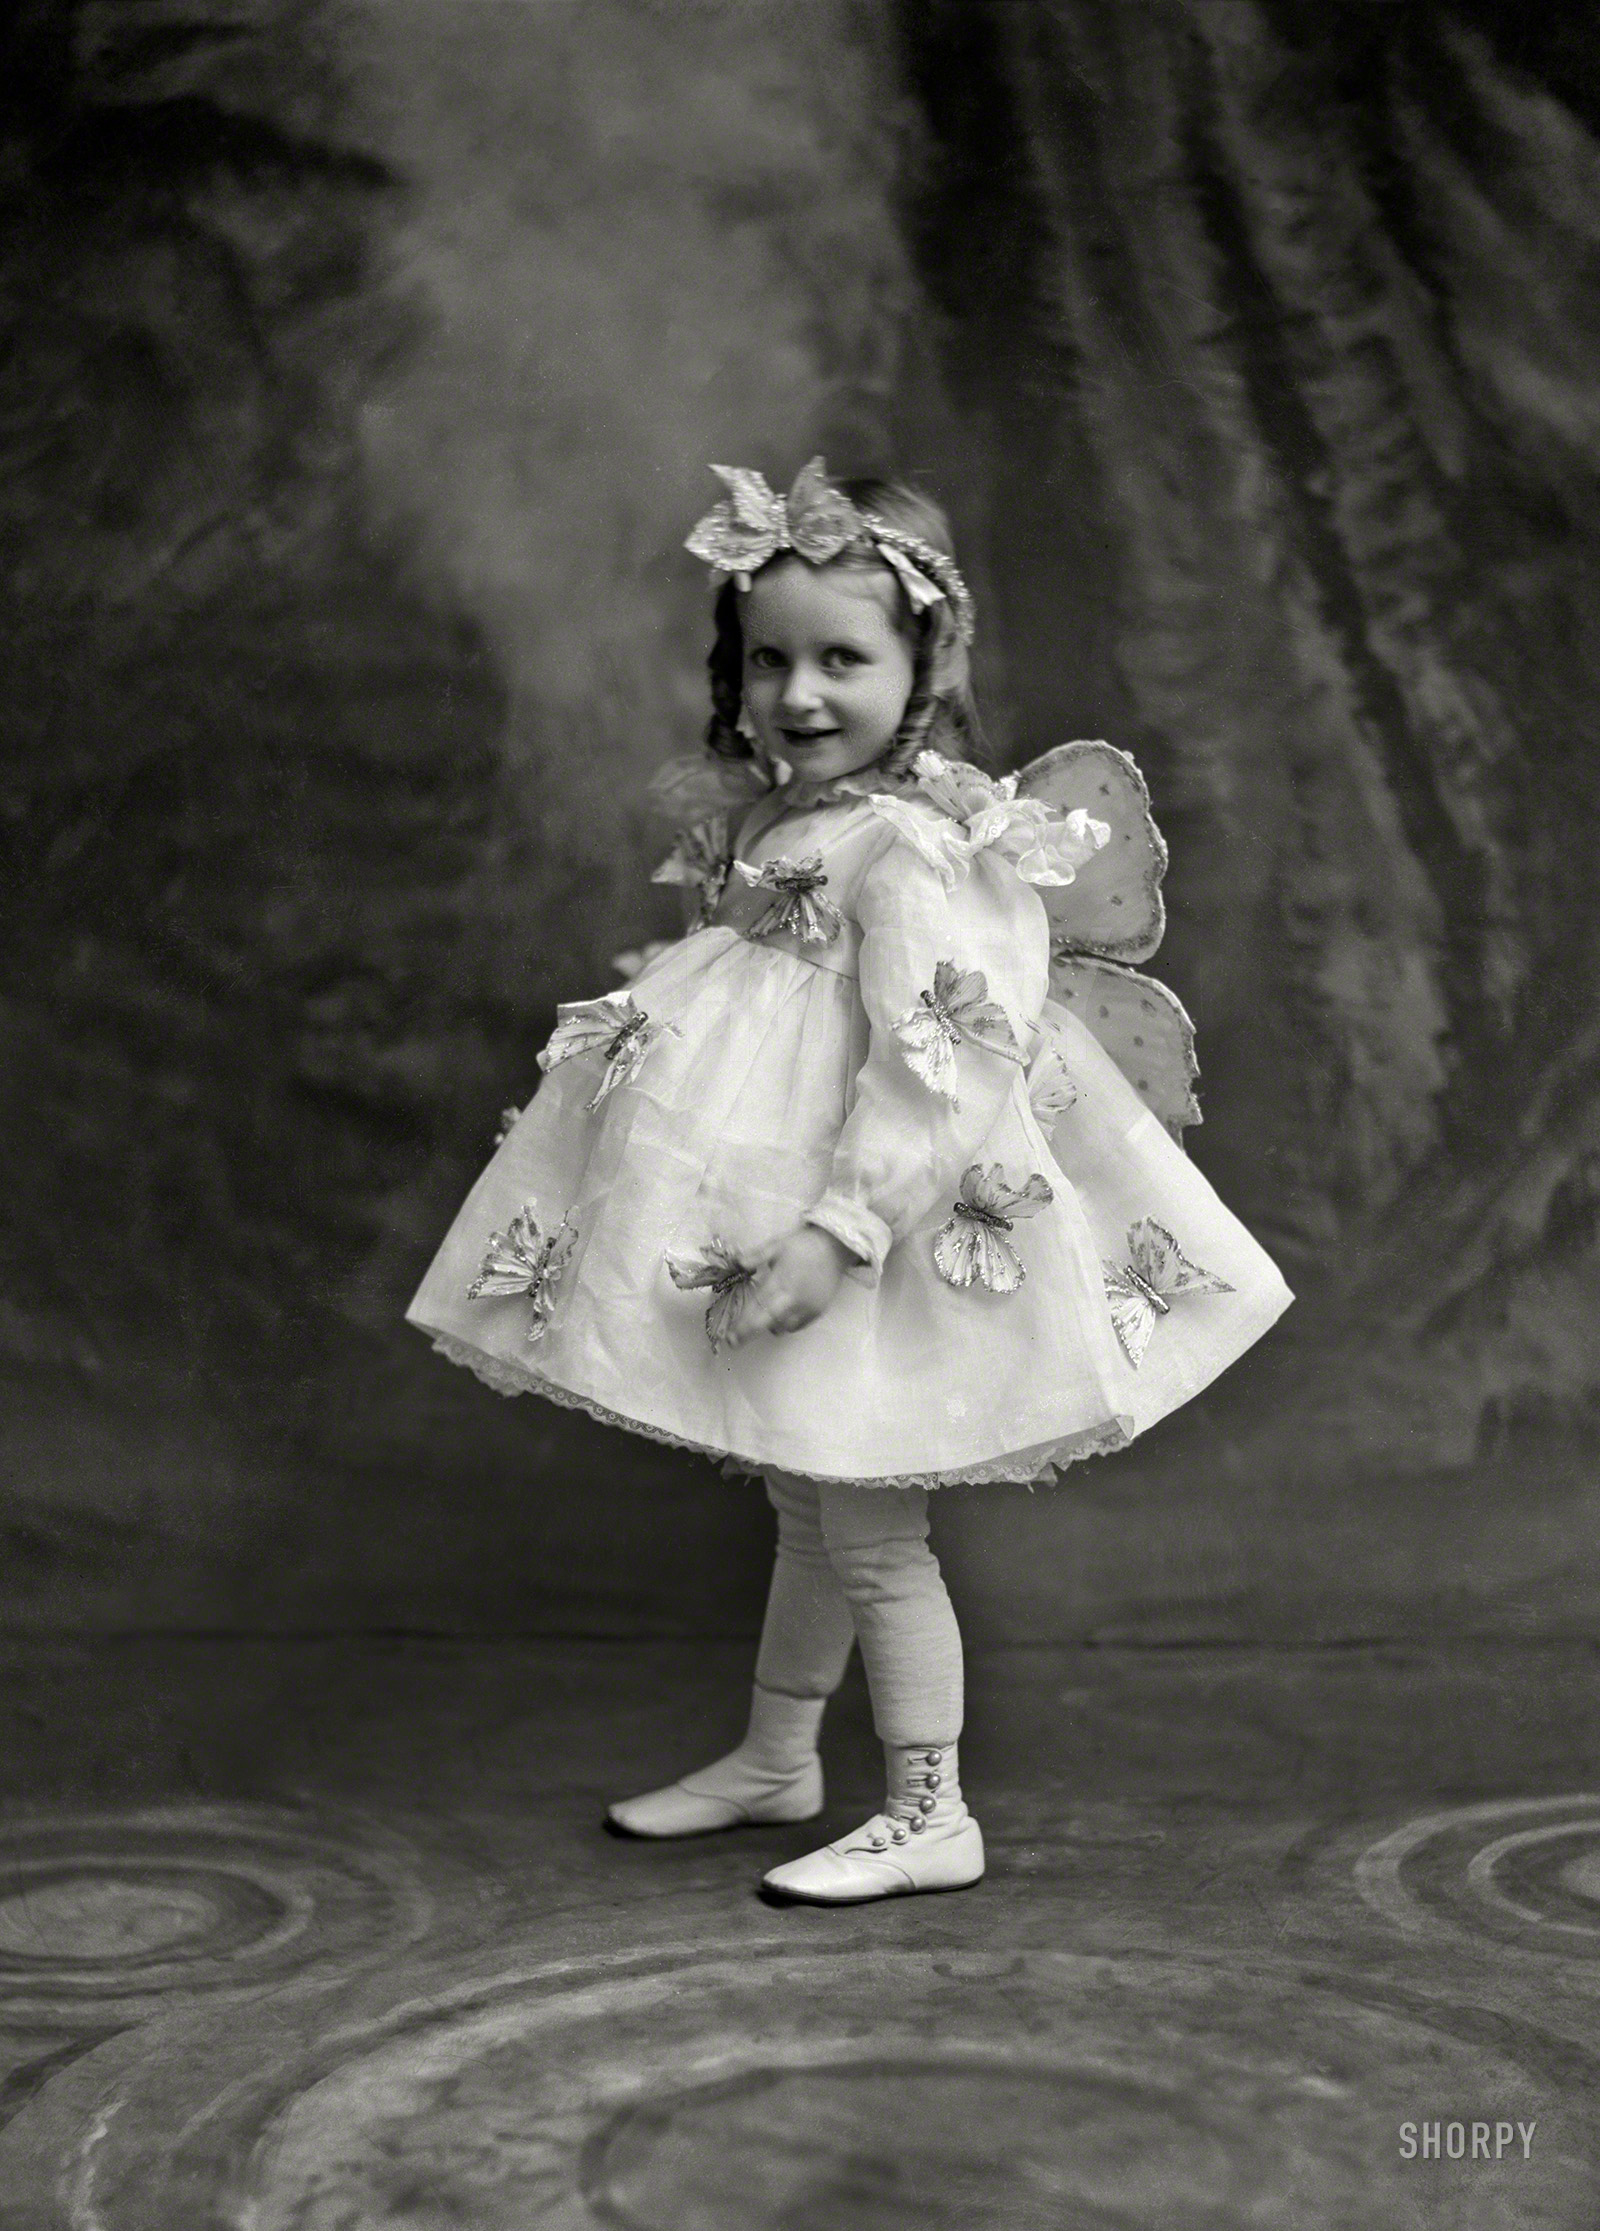 "Fischer, Mrs. J.F. (child). Between February 1894 and February 1901." 5x7 glass negative from the C.M. Bell portrait studio in Washington, D.C. View full size.